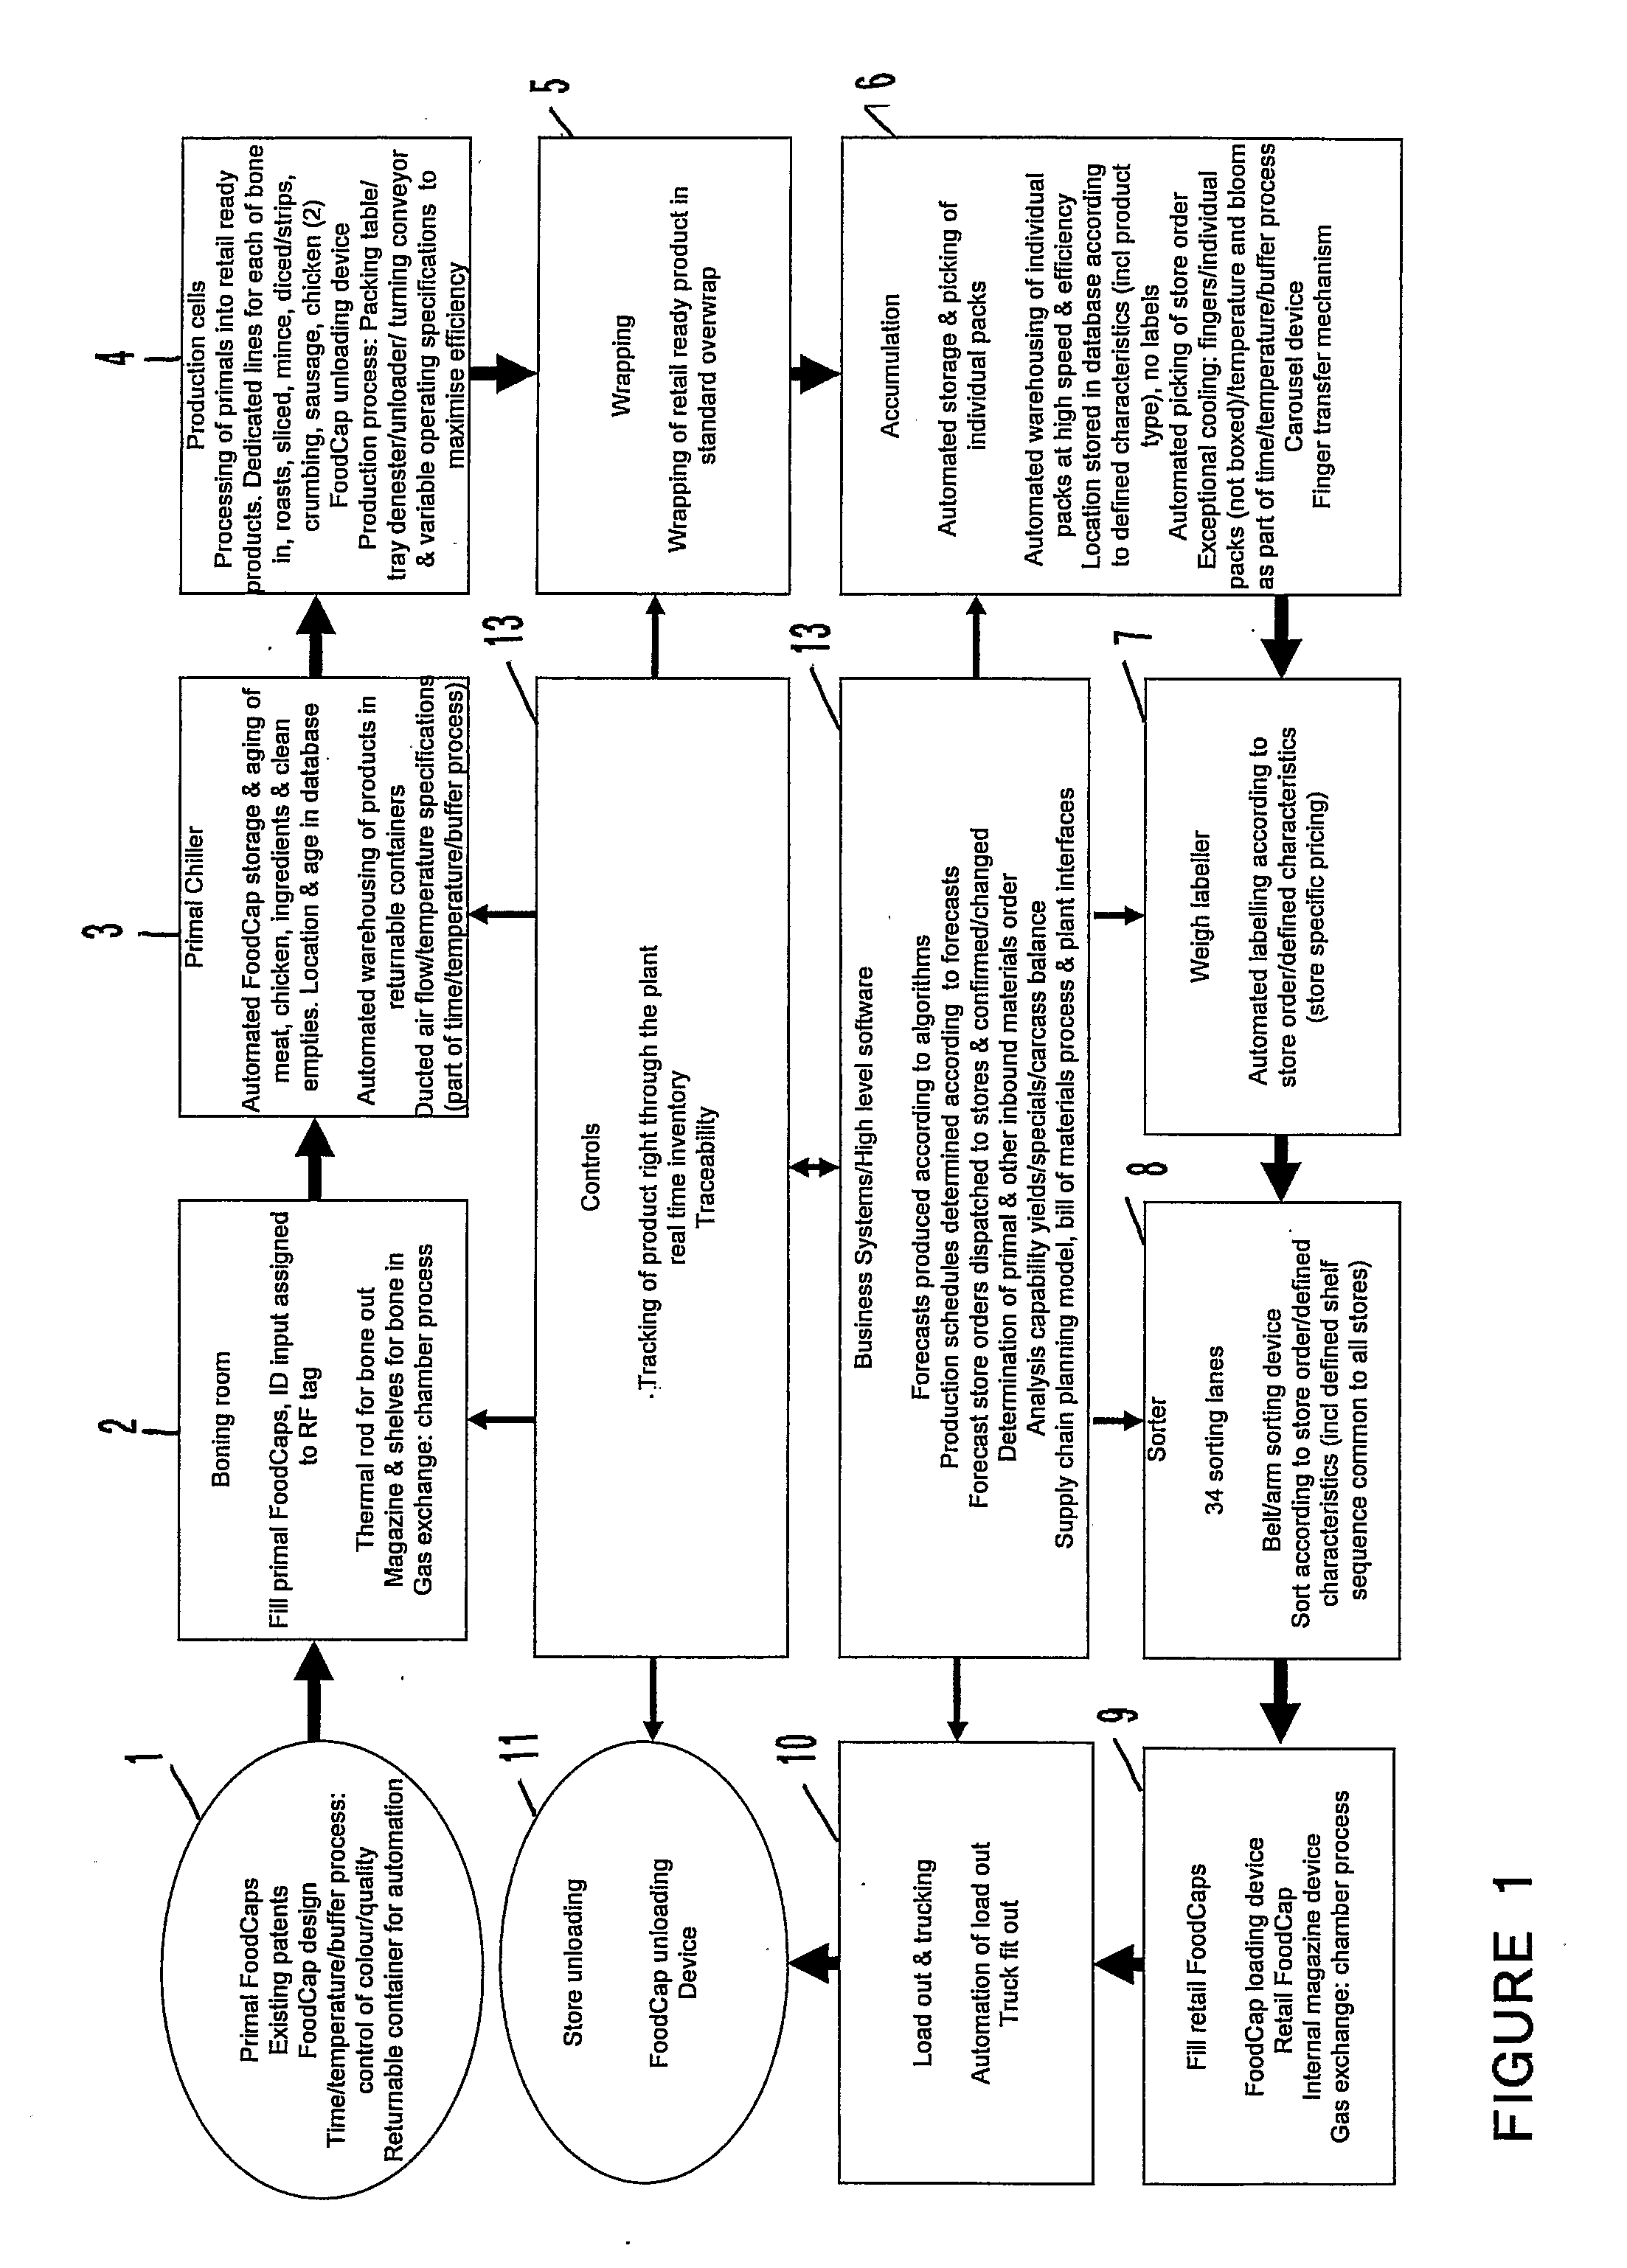 Apparatus and Method for Processing and Distribution of Peishable Food Products